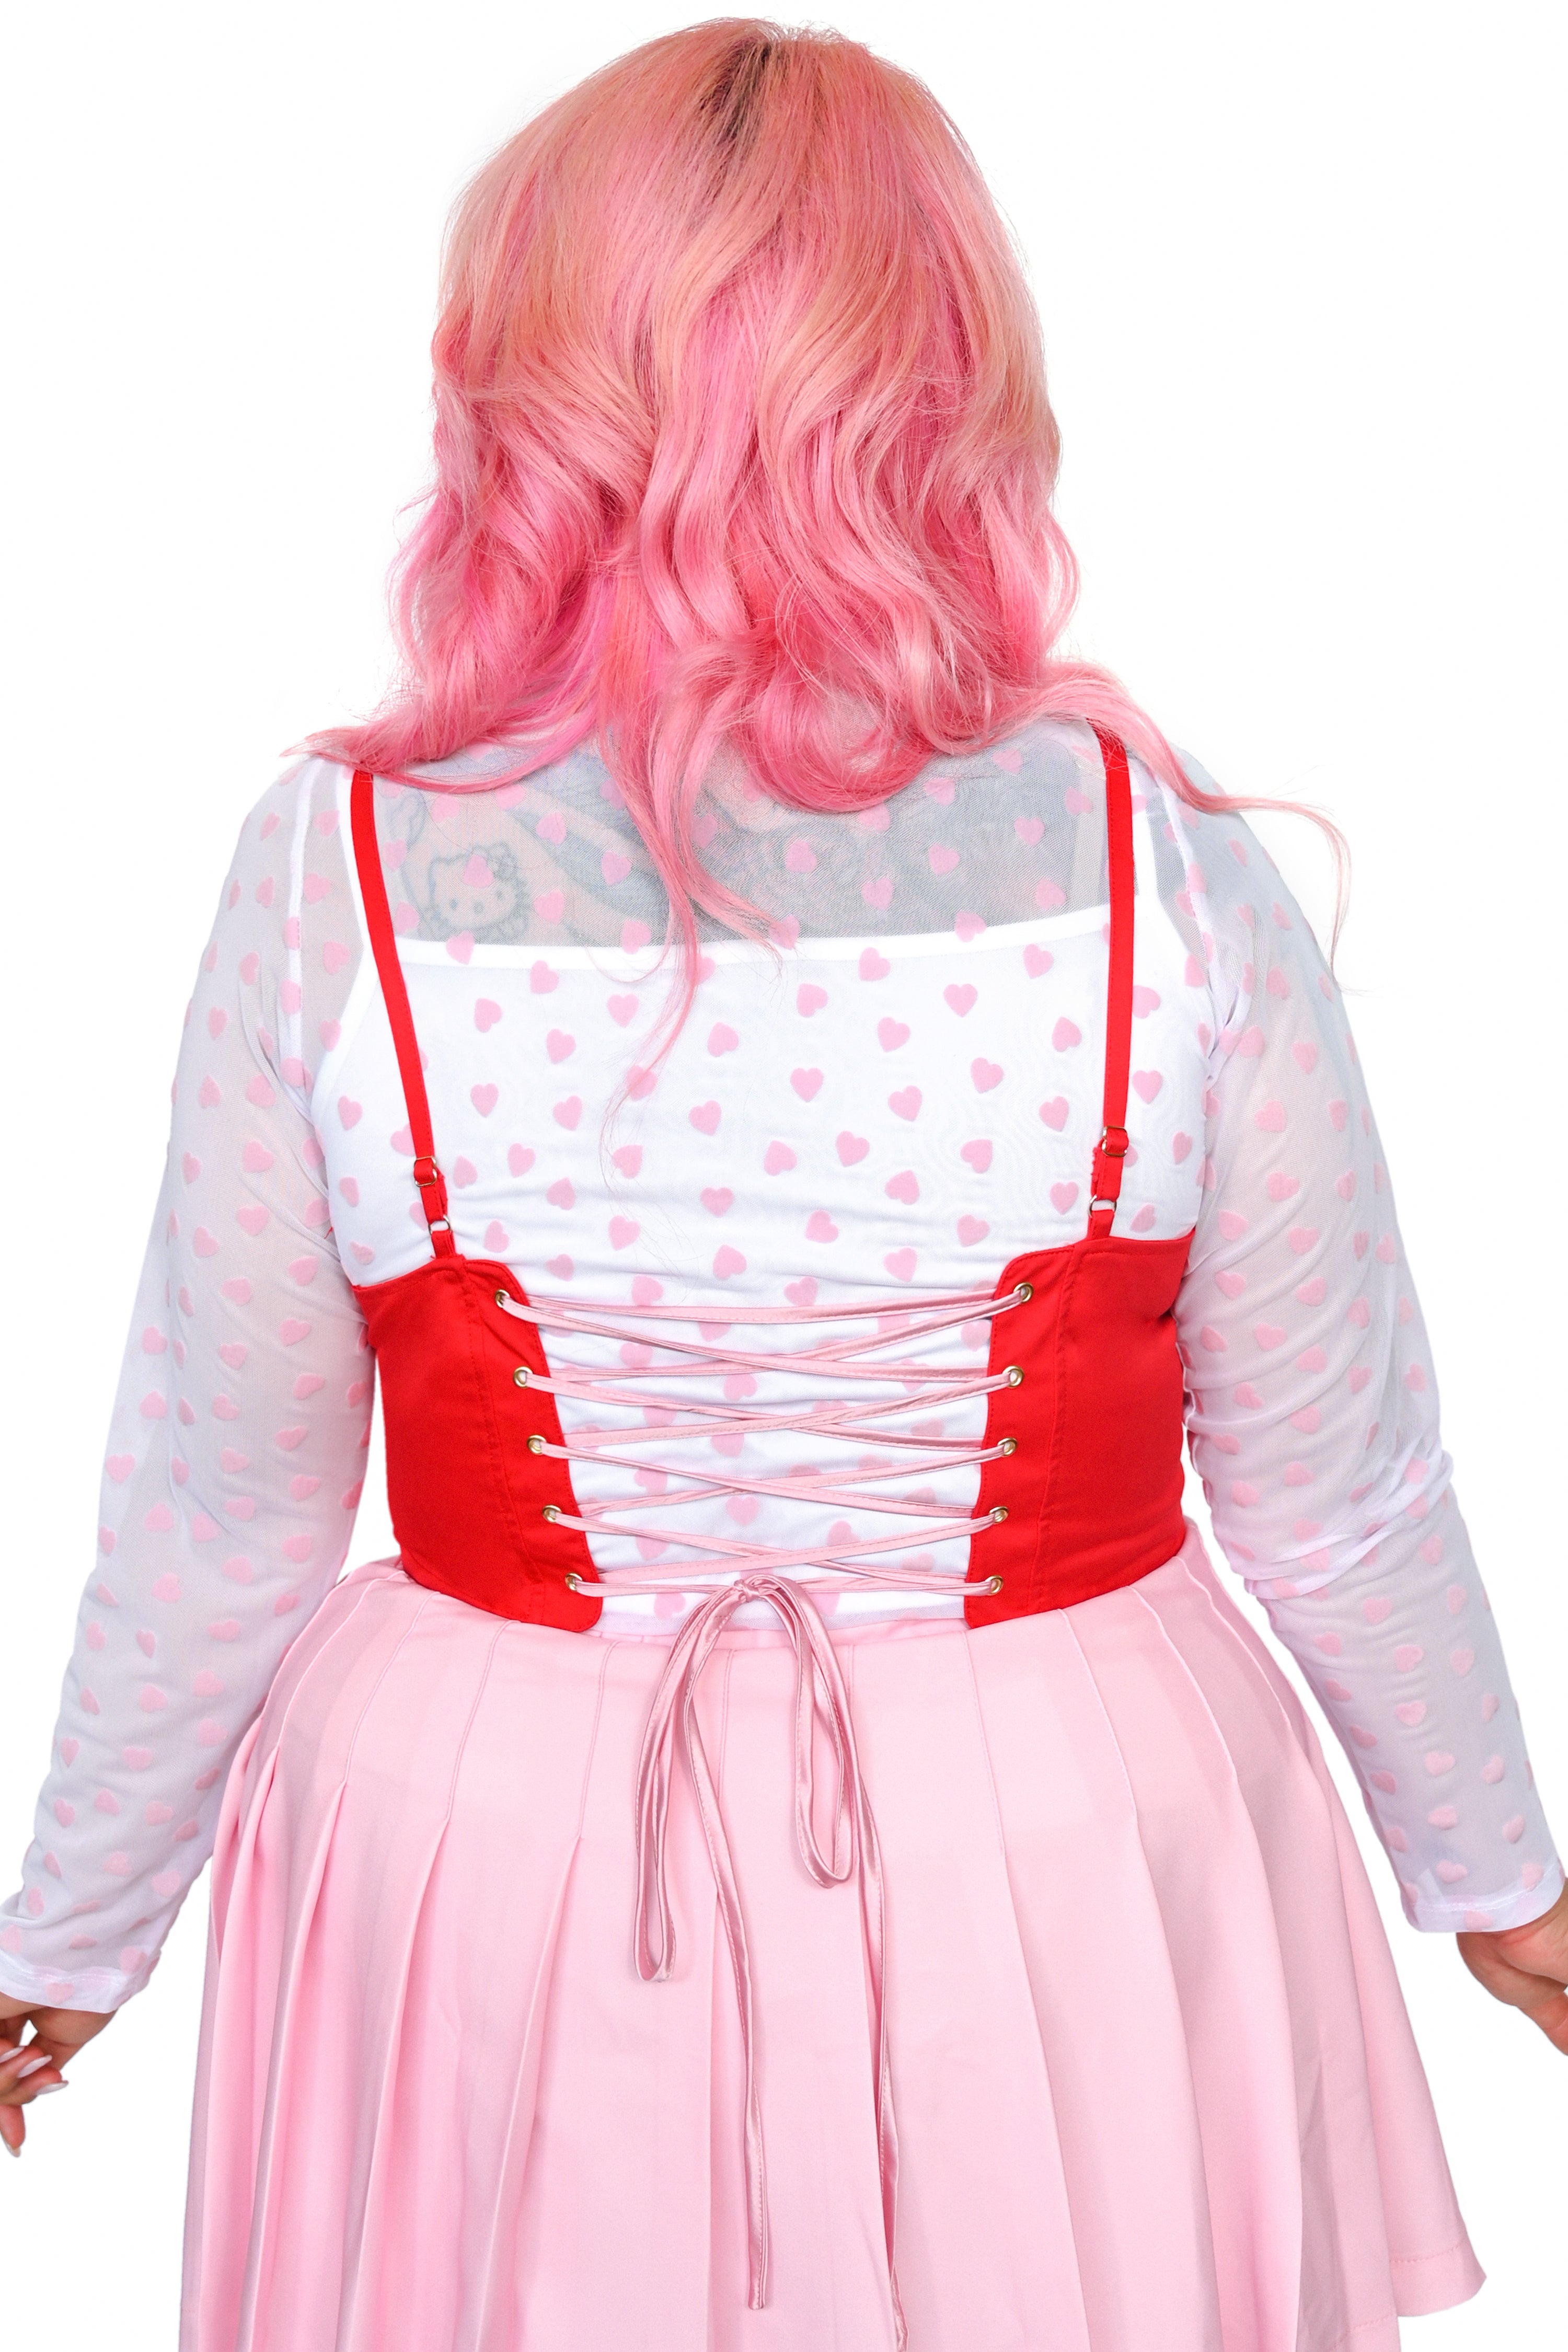 This red, pink, light pink, and white heart shaped corset top has adjustable straps and a lace-up back. The Base color of the corset top is red and a red ruffle surrounds the other colours of the heart.